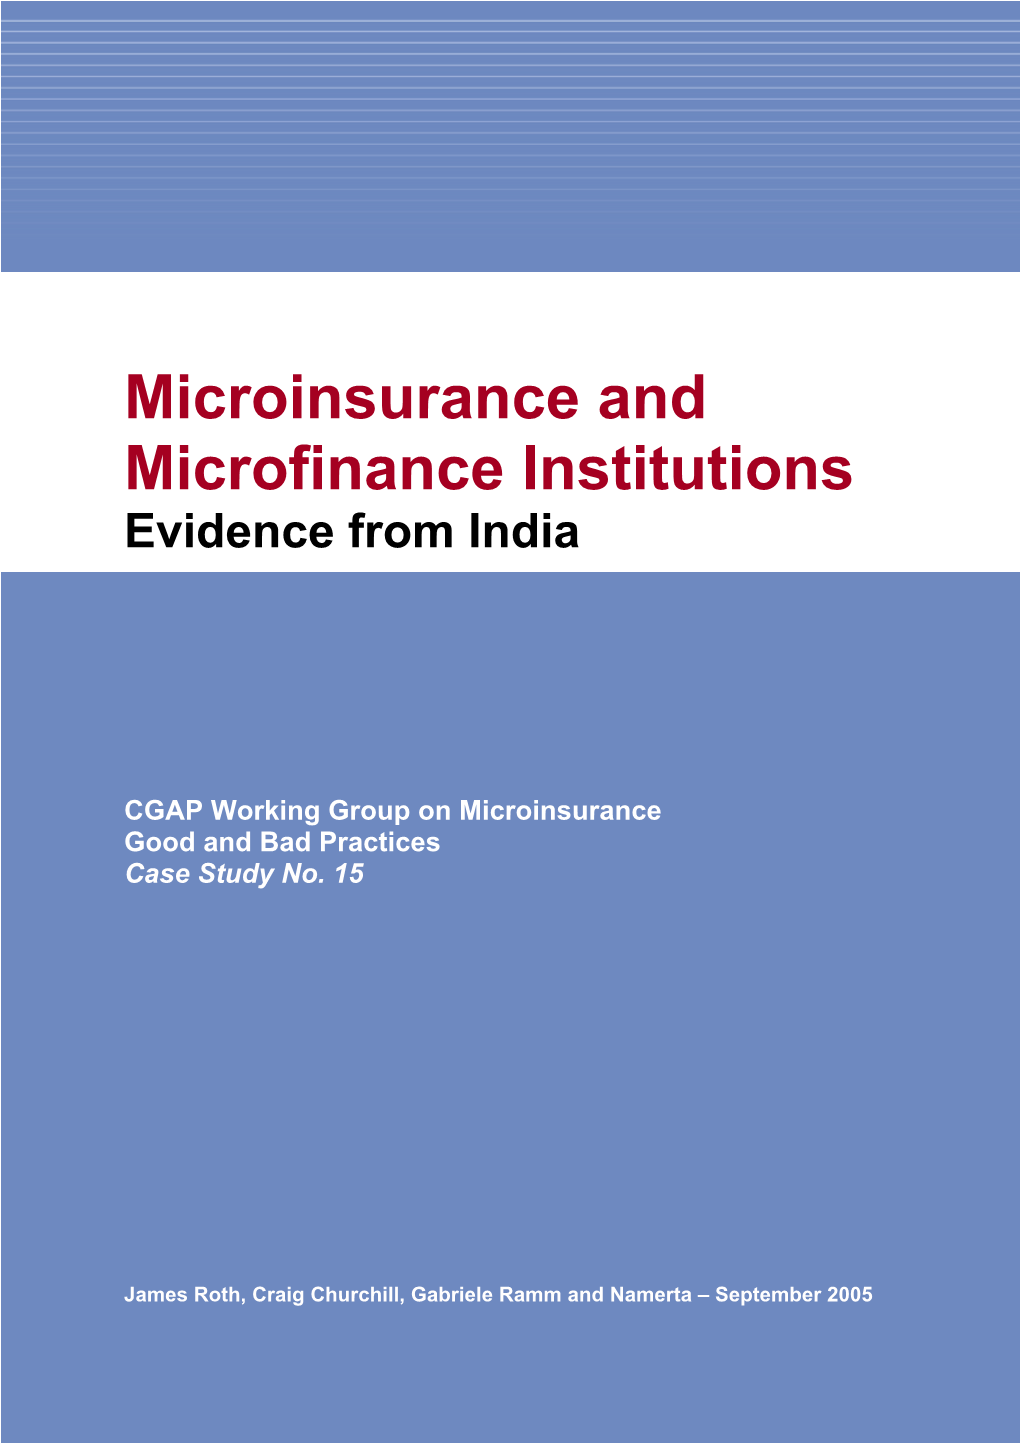 Microinsurance and Microfinance Institutions Evidence from India